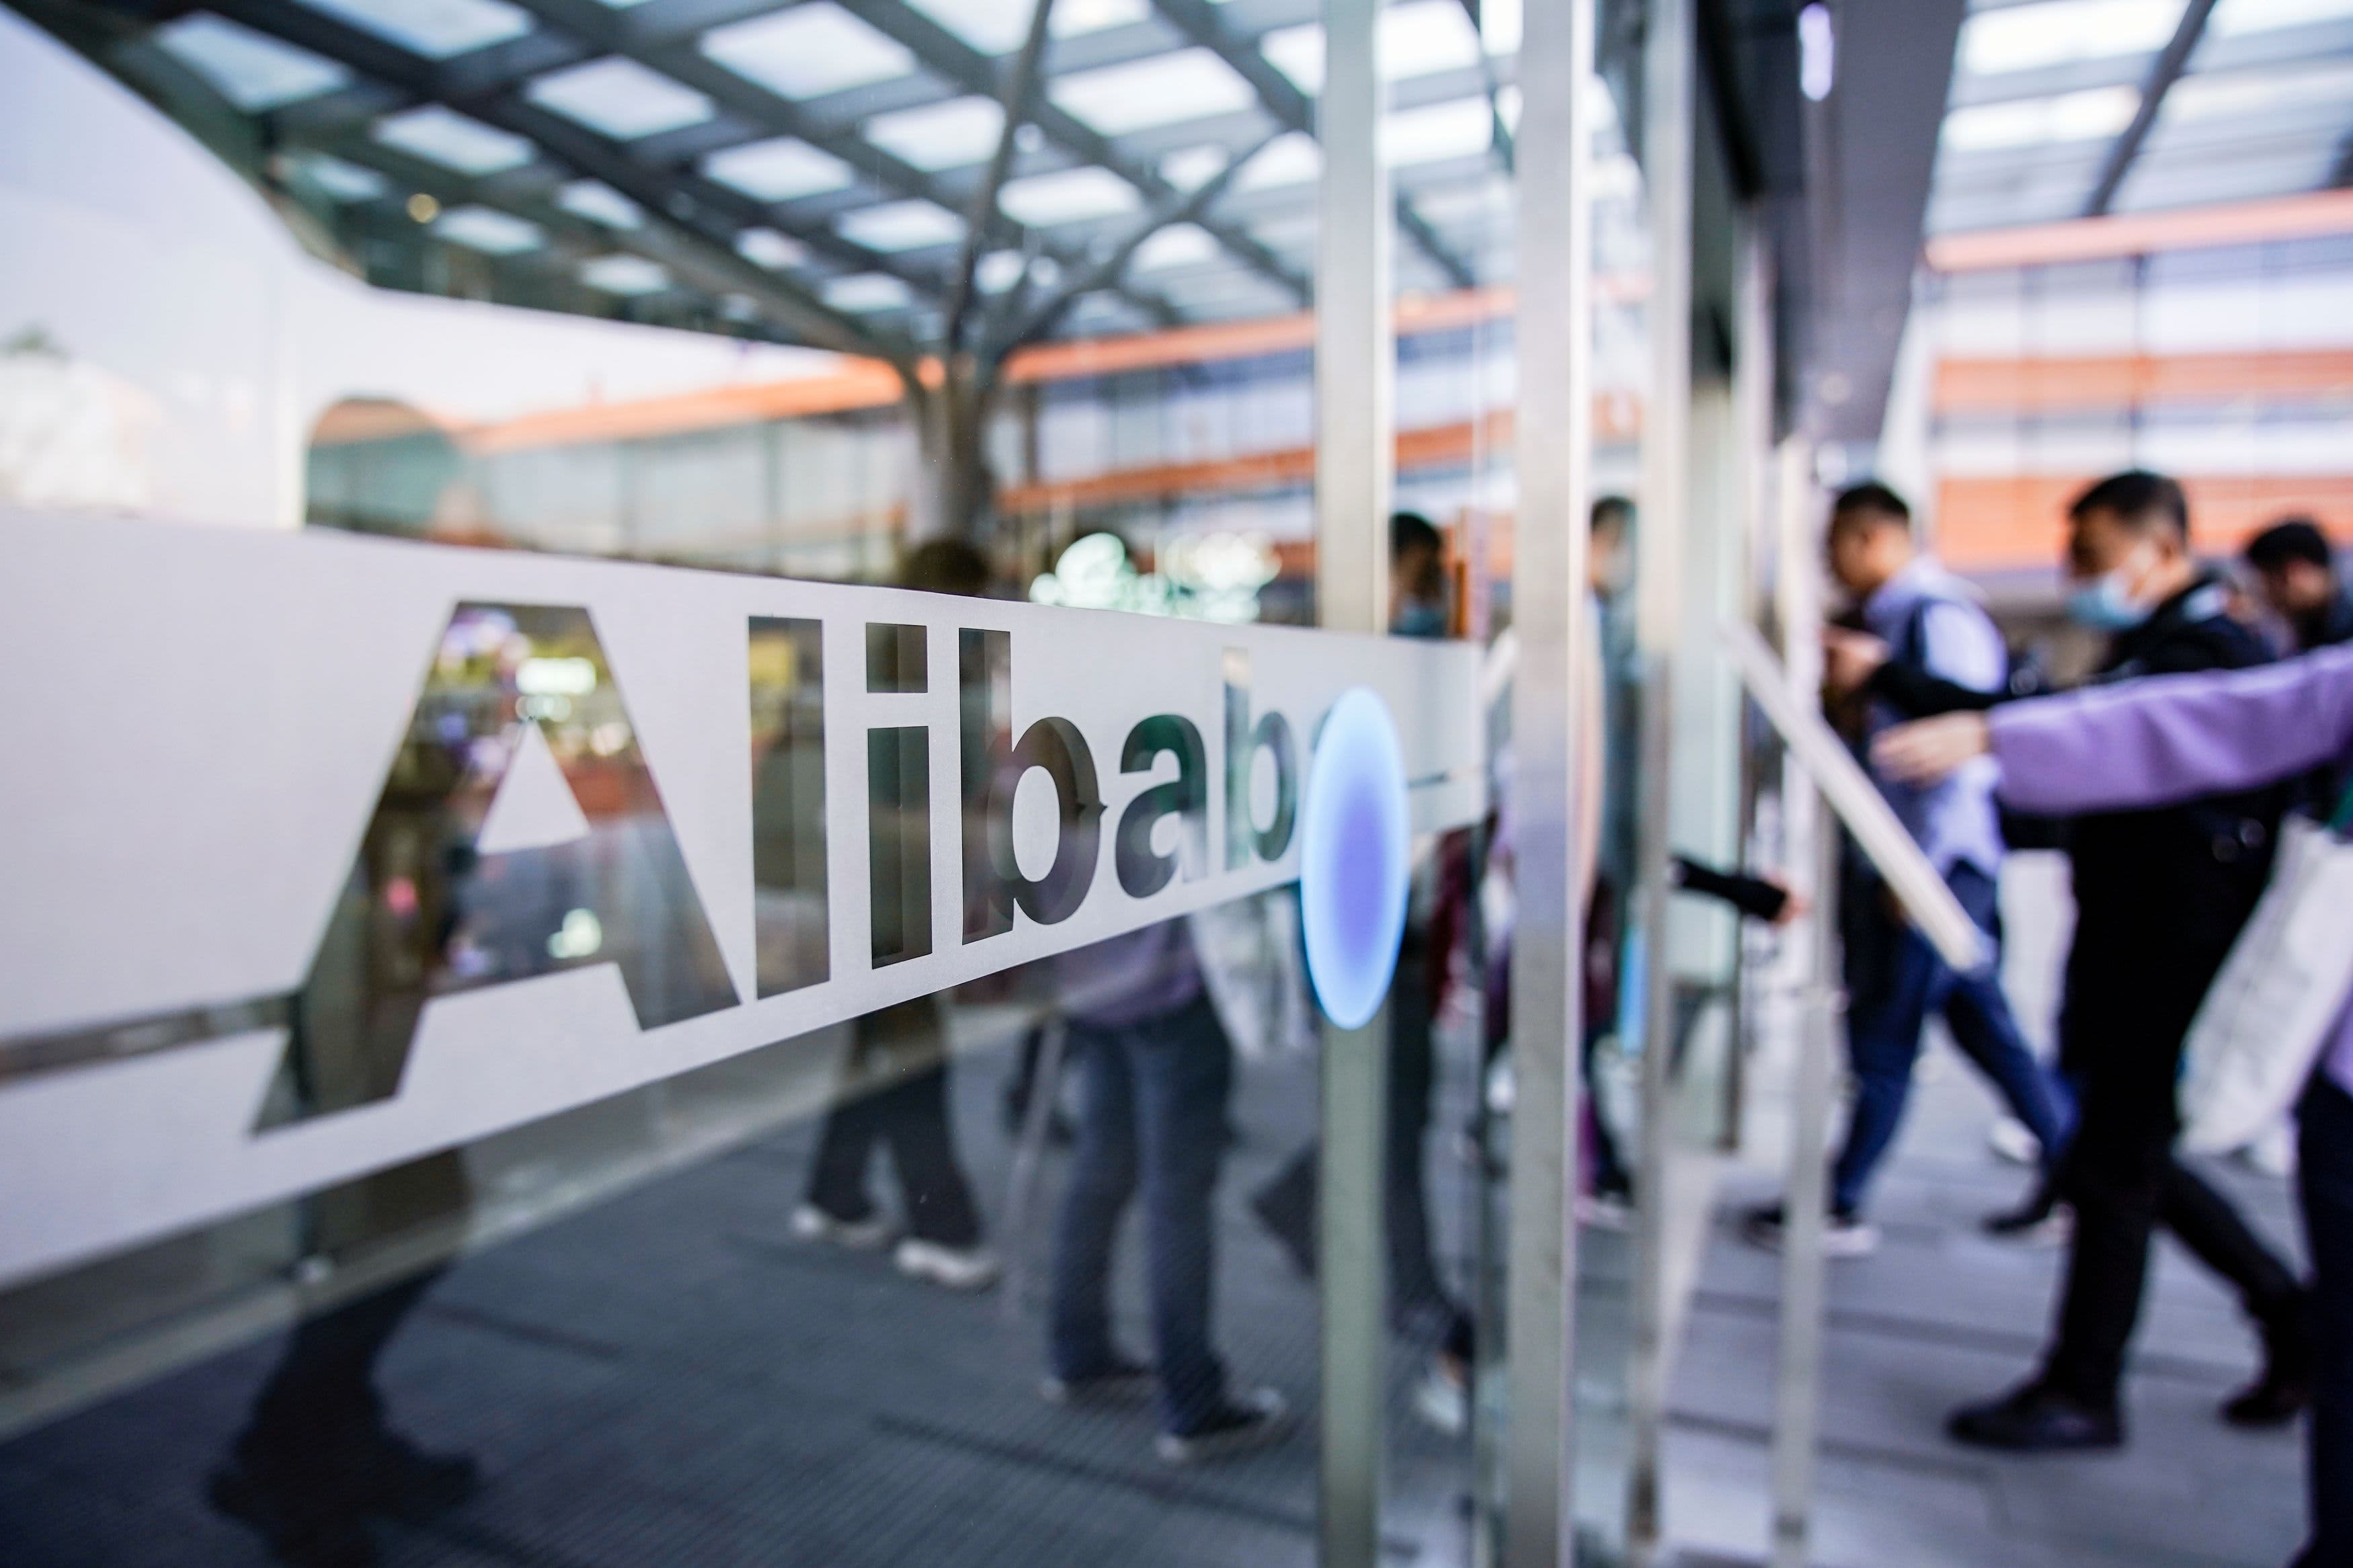 Alibaba shares traded in the US fall amid reports of investigation by China